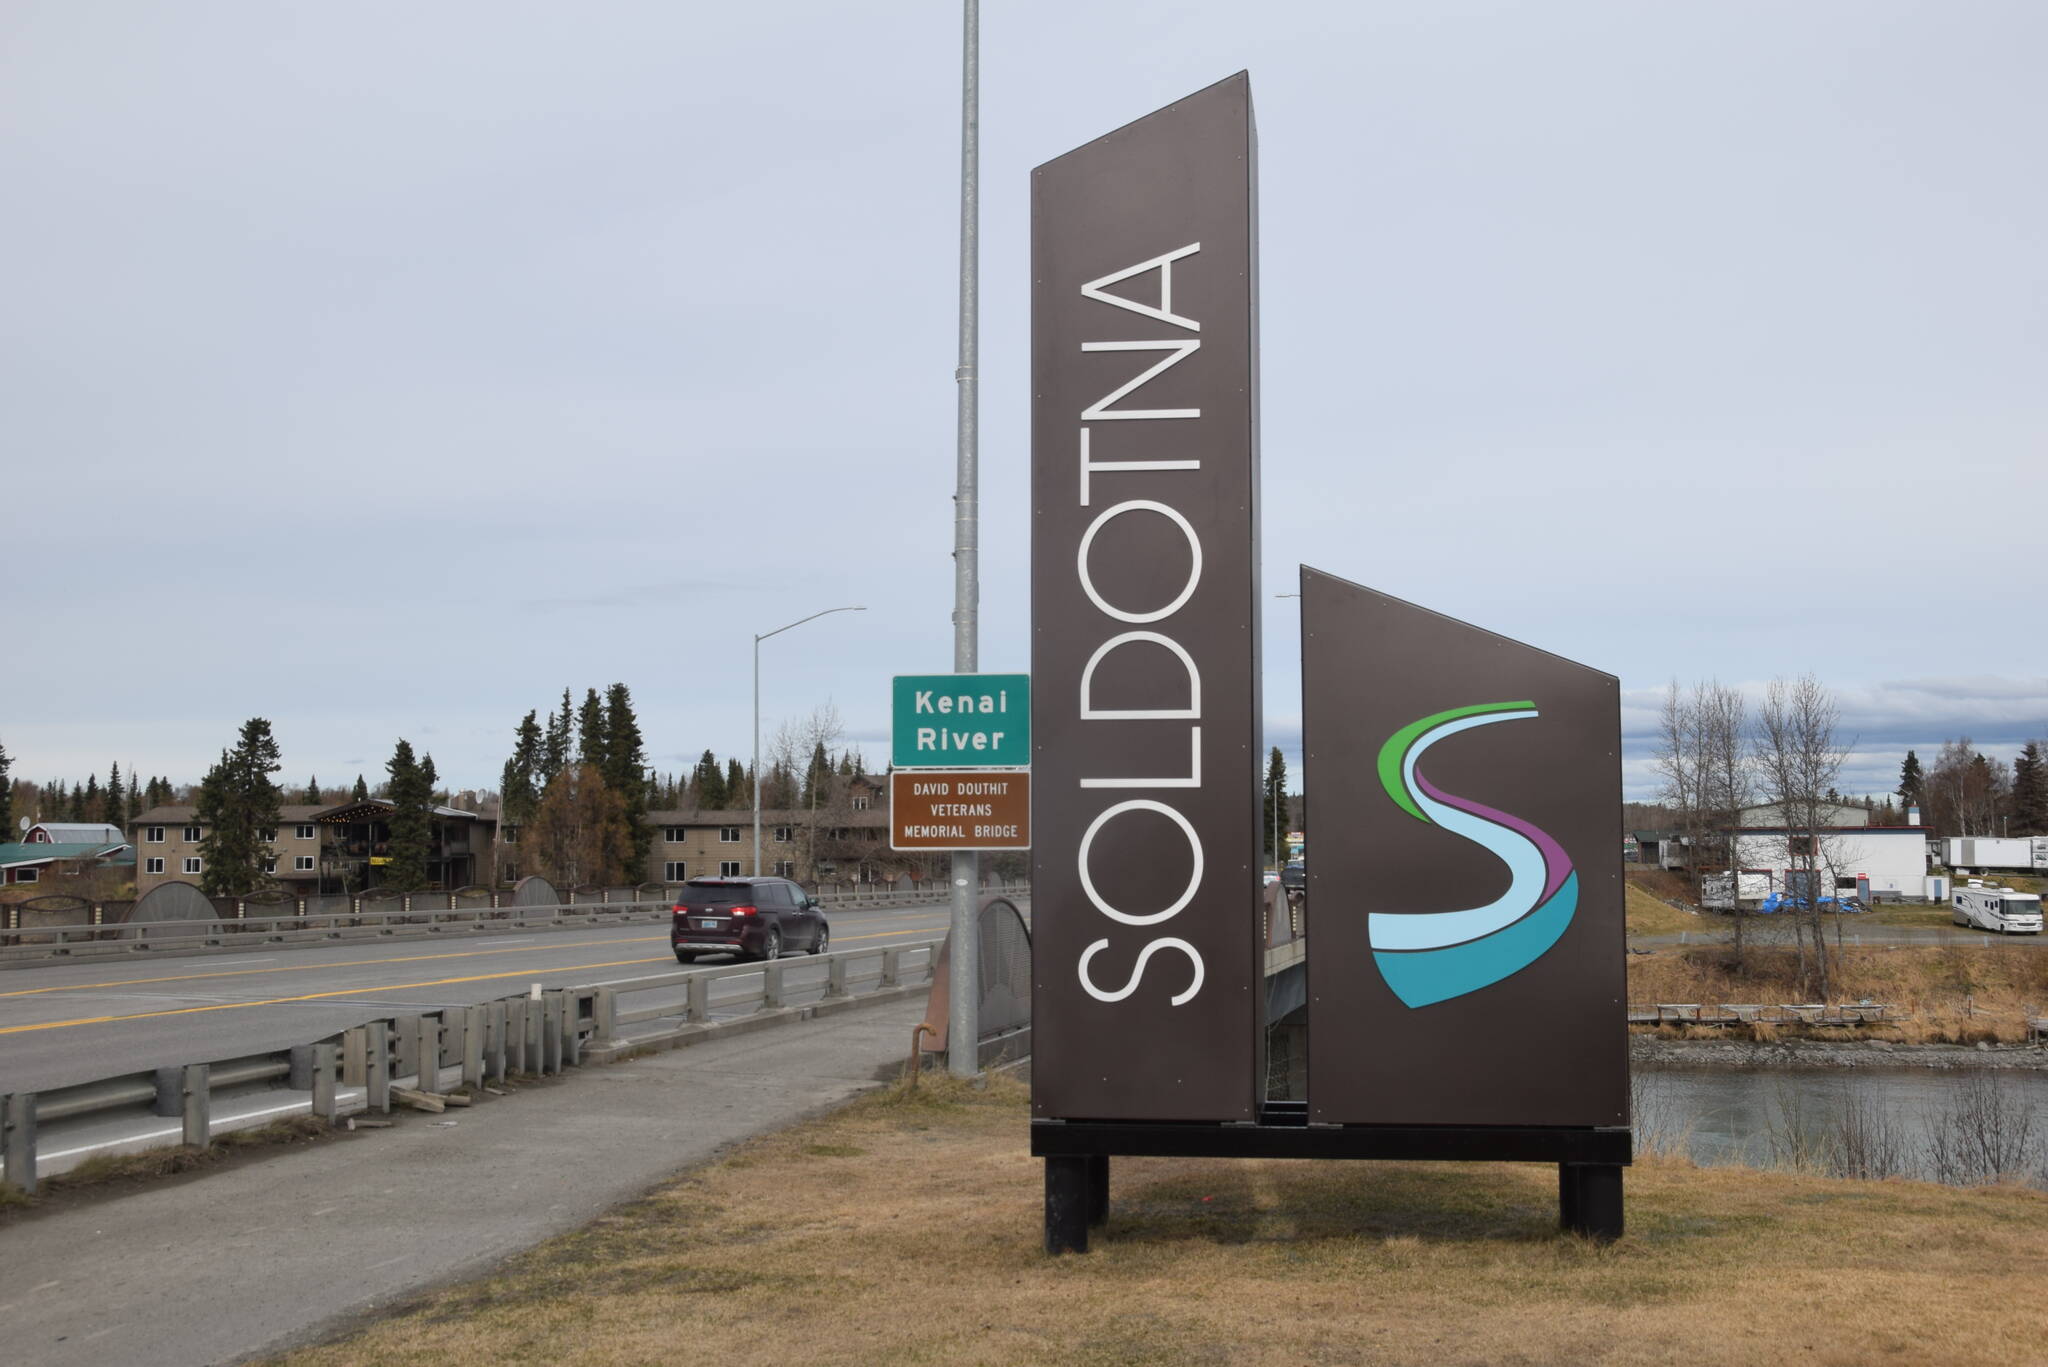 A sign welcoming people to the City of Soldotna stands near the intersection of the Sterling Highway and Kenai River on May 1, 2019, in Soldotna, Alaska. (Photo by Brian Mazurek/Peninsula Clarion)